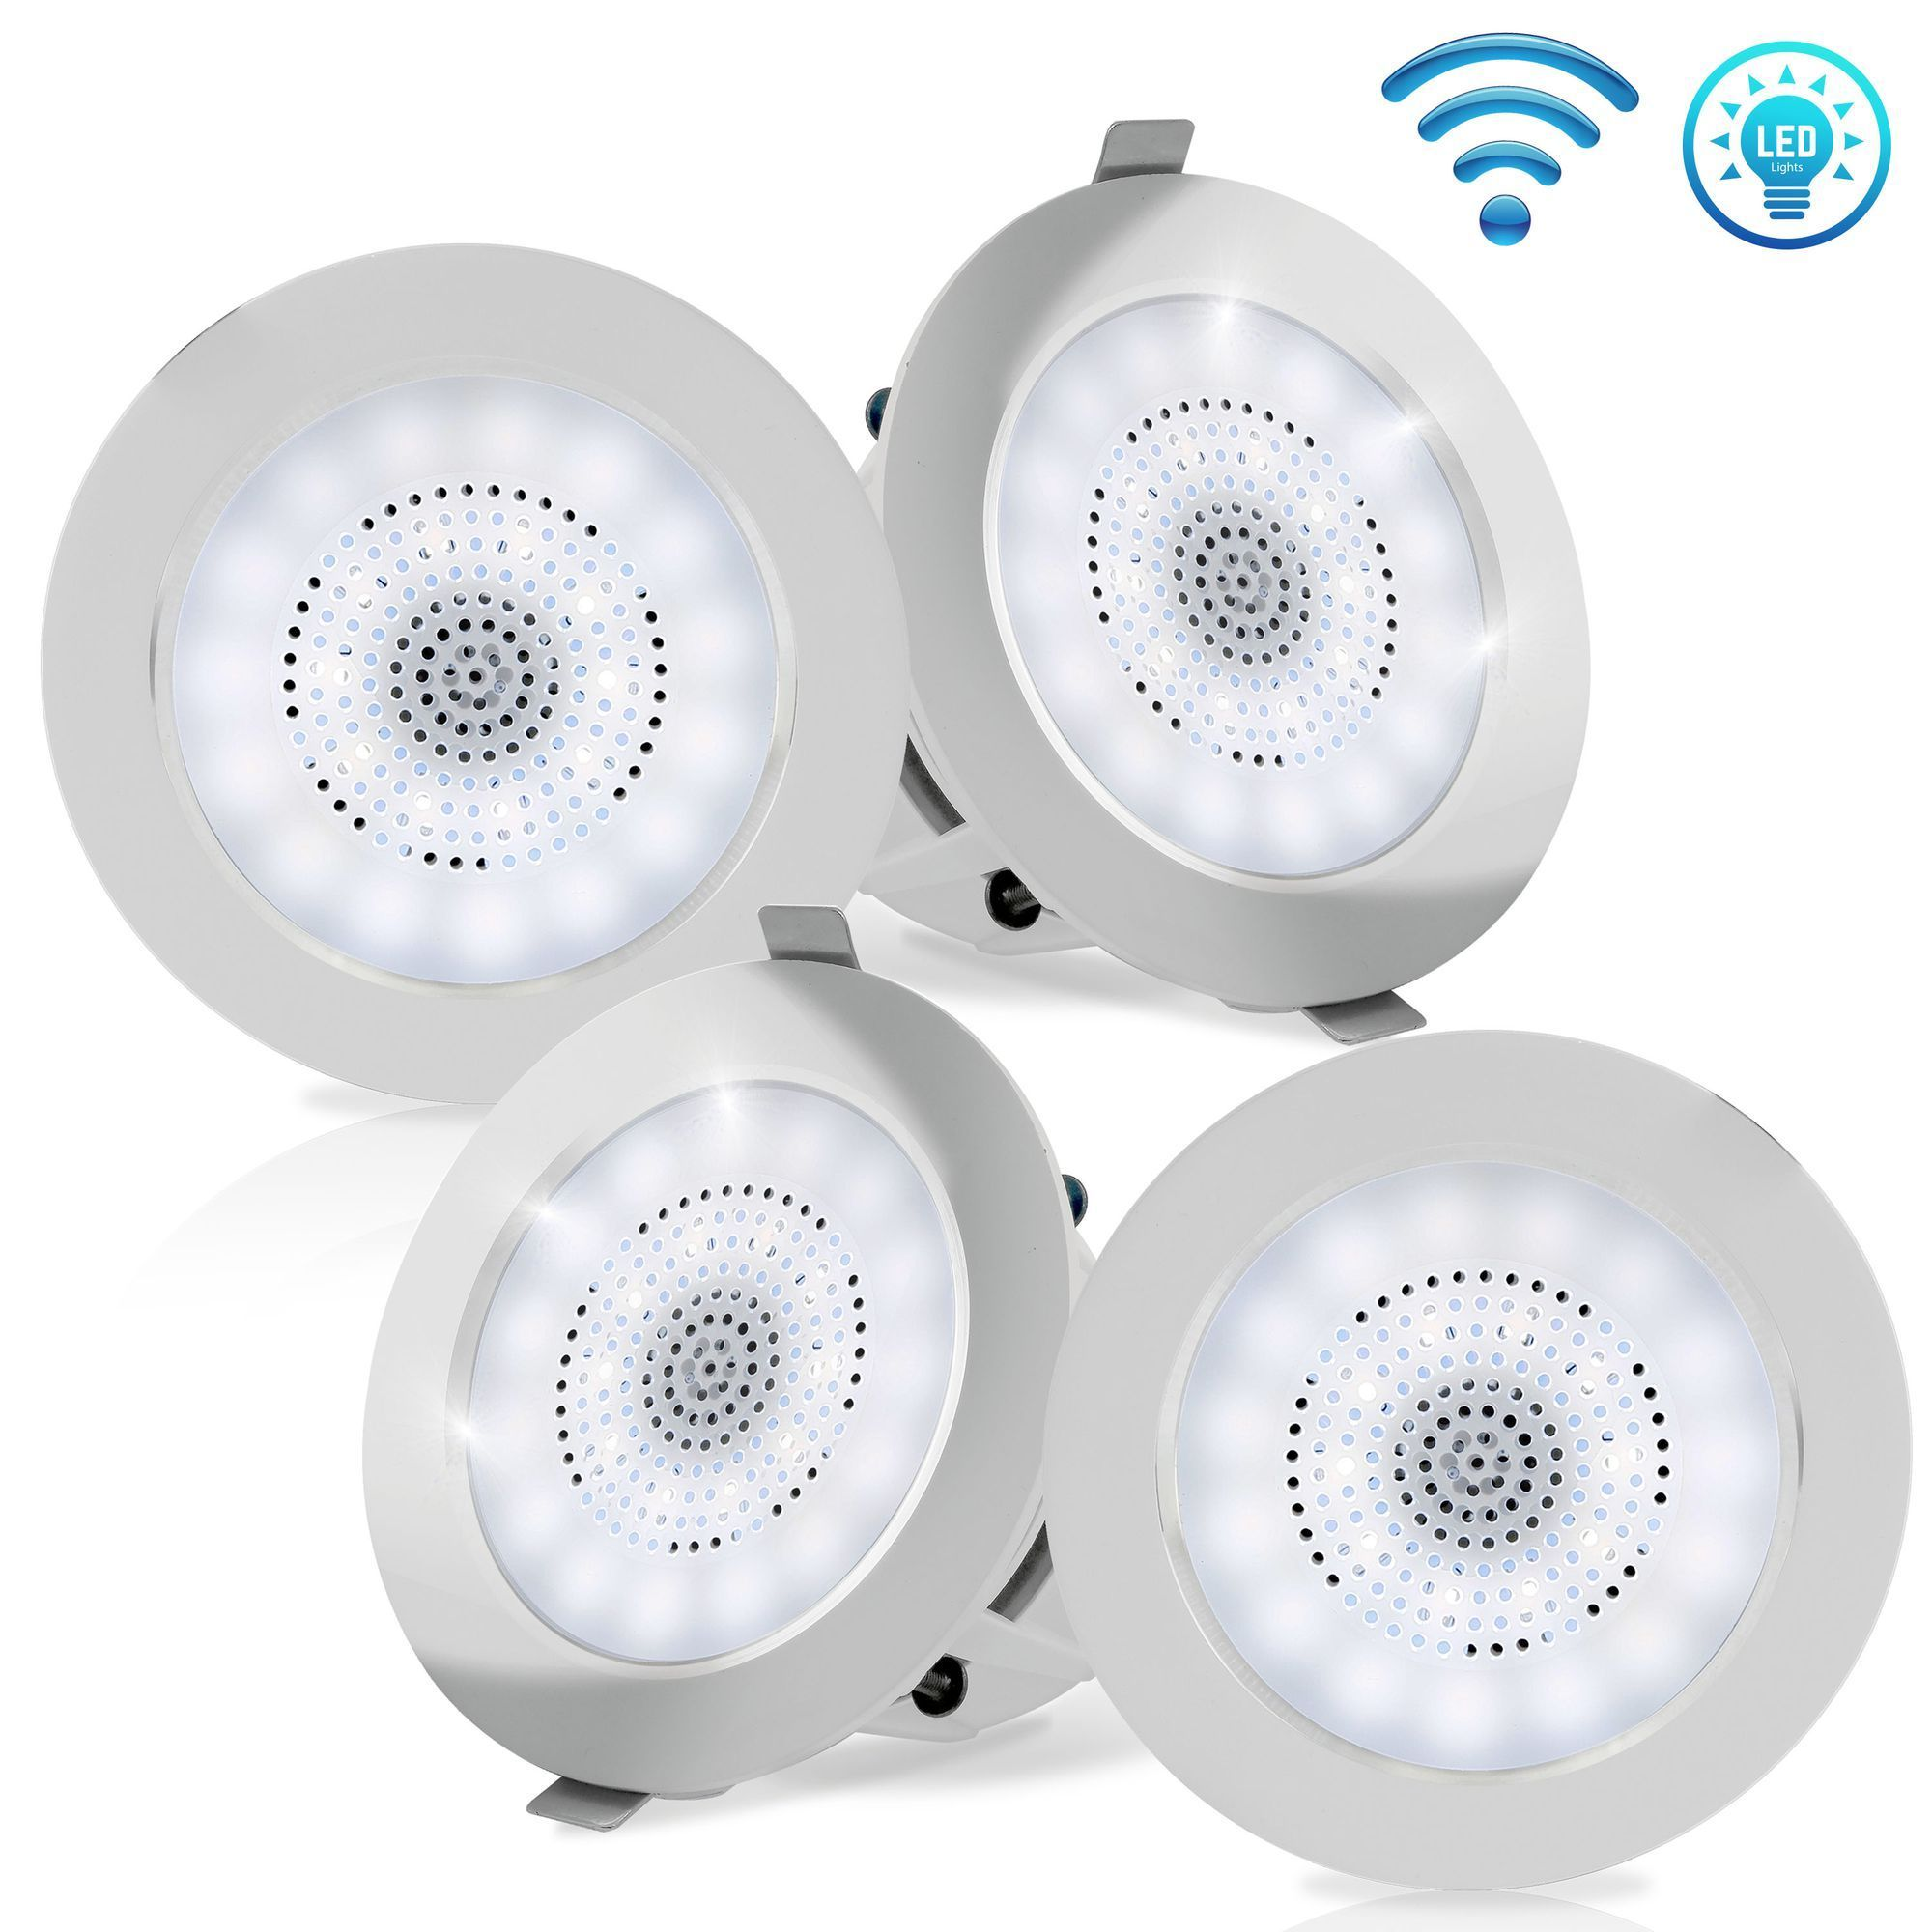 Pyle Set of 4 4” Bluetooth 2-Way Home Speaker System, In-wall/Ceiling, Amplifier, (PDIC4CBTL4B)